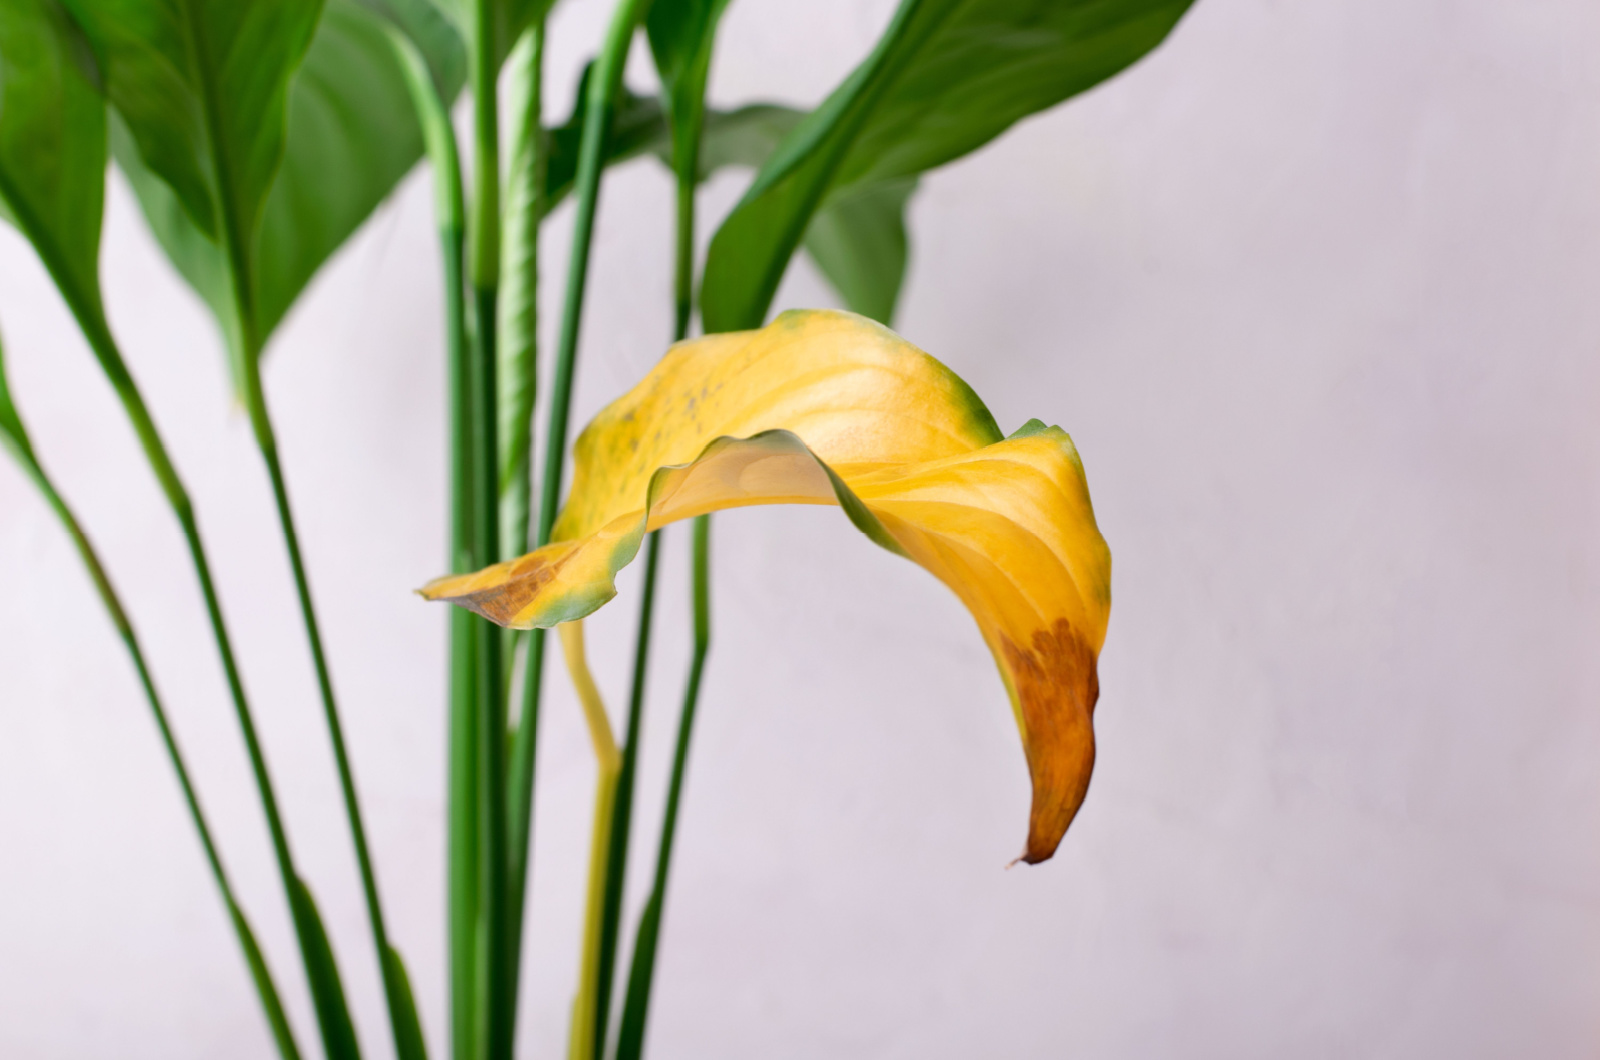 Peace lily attacked by pests